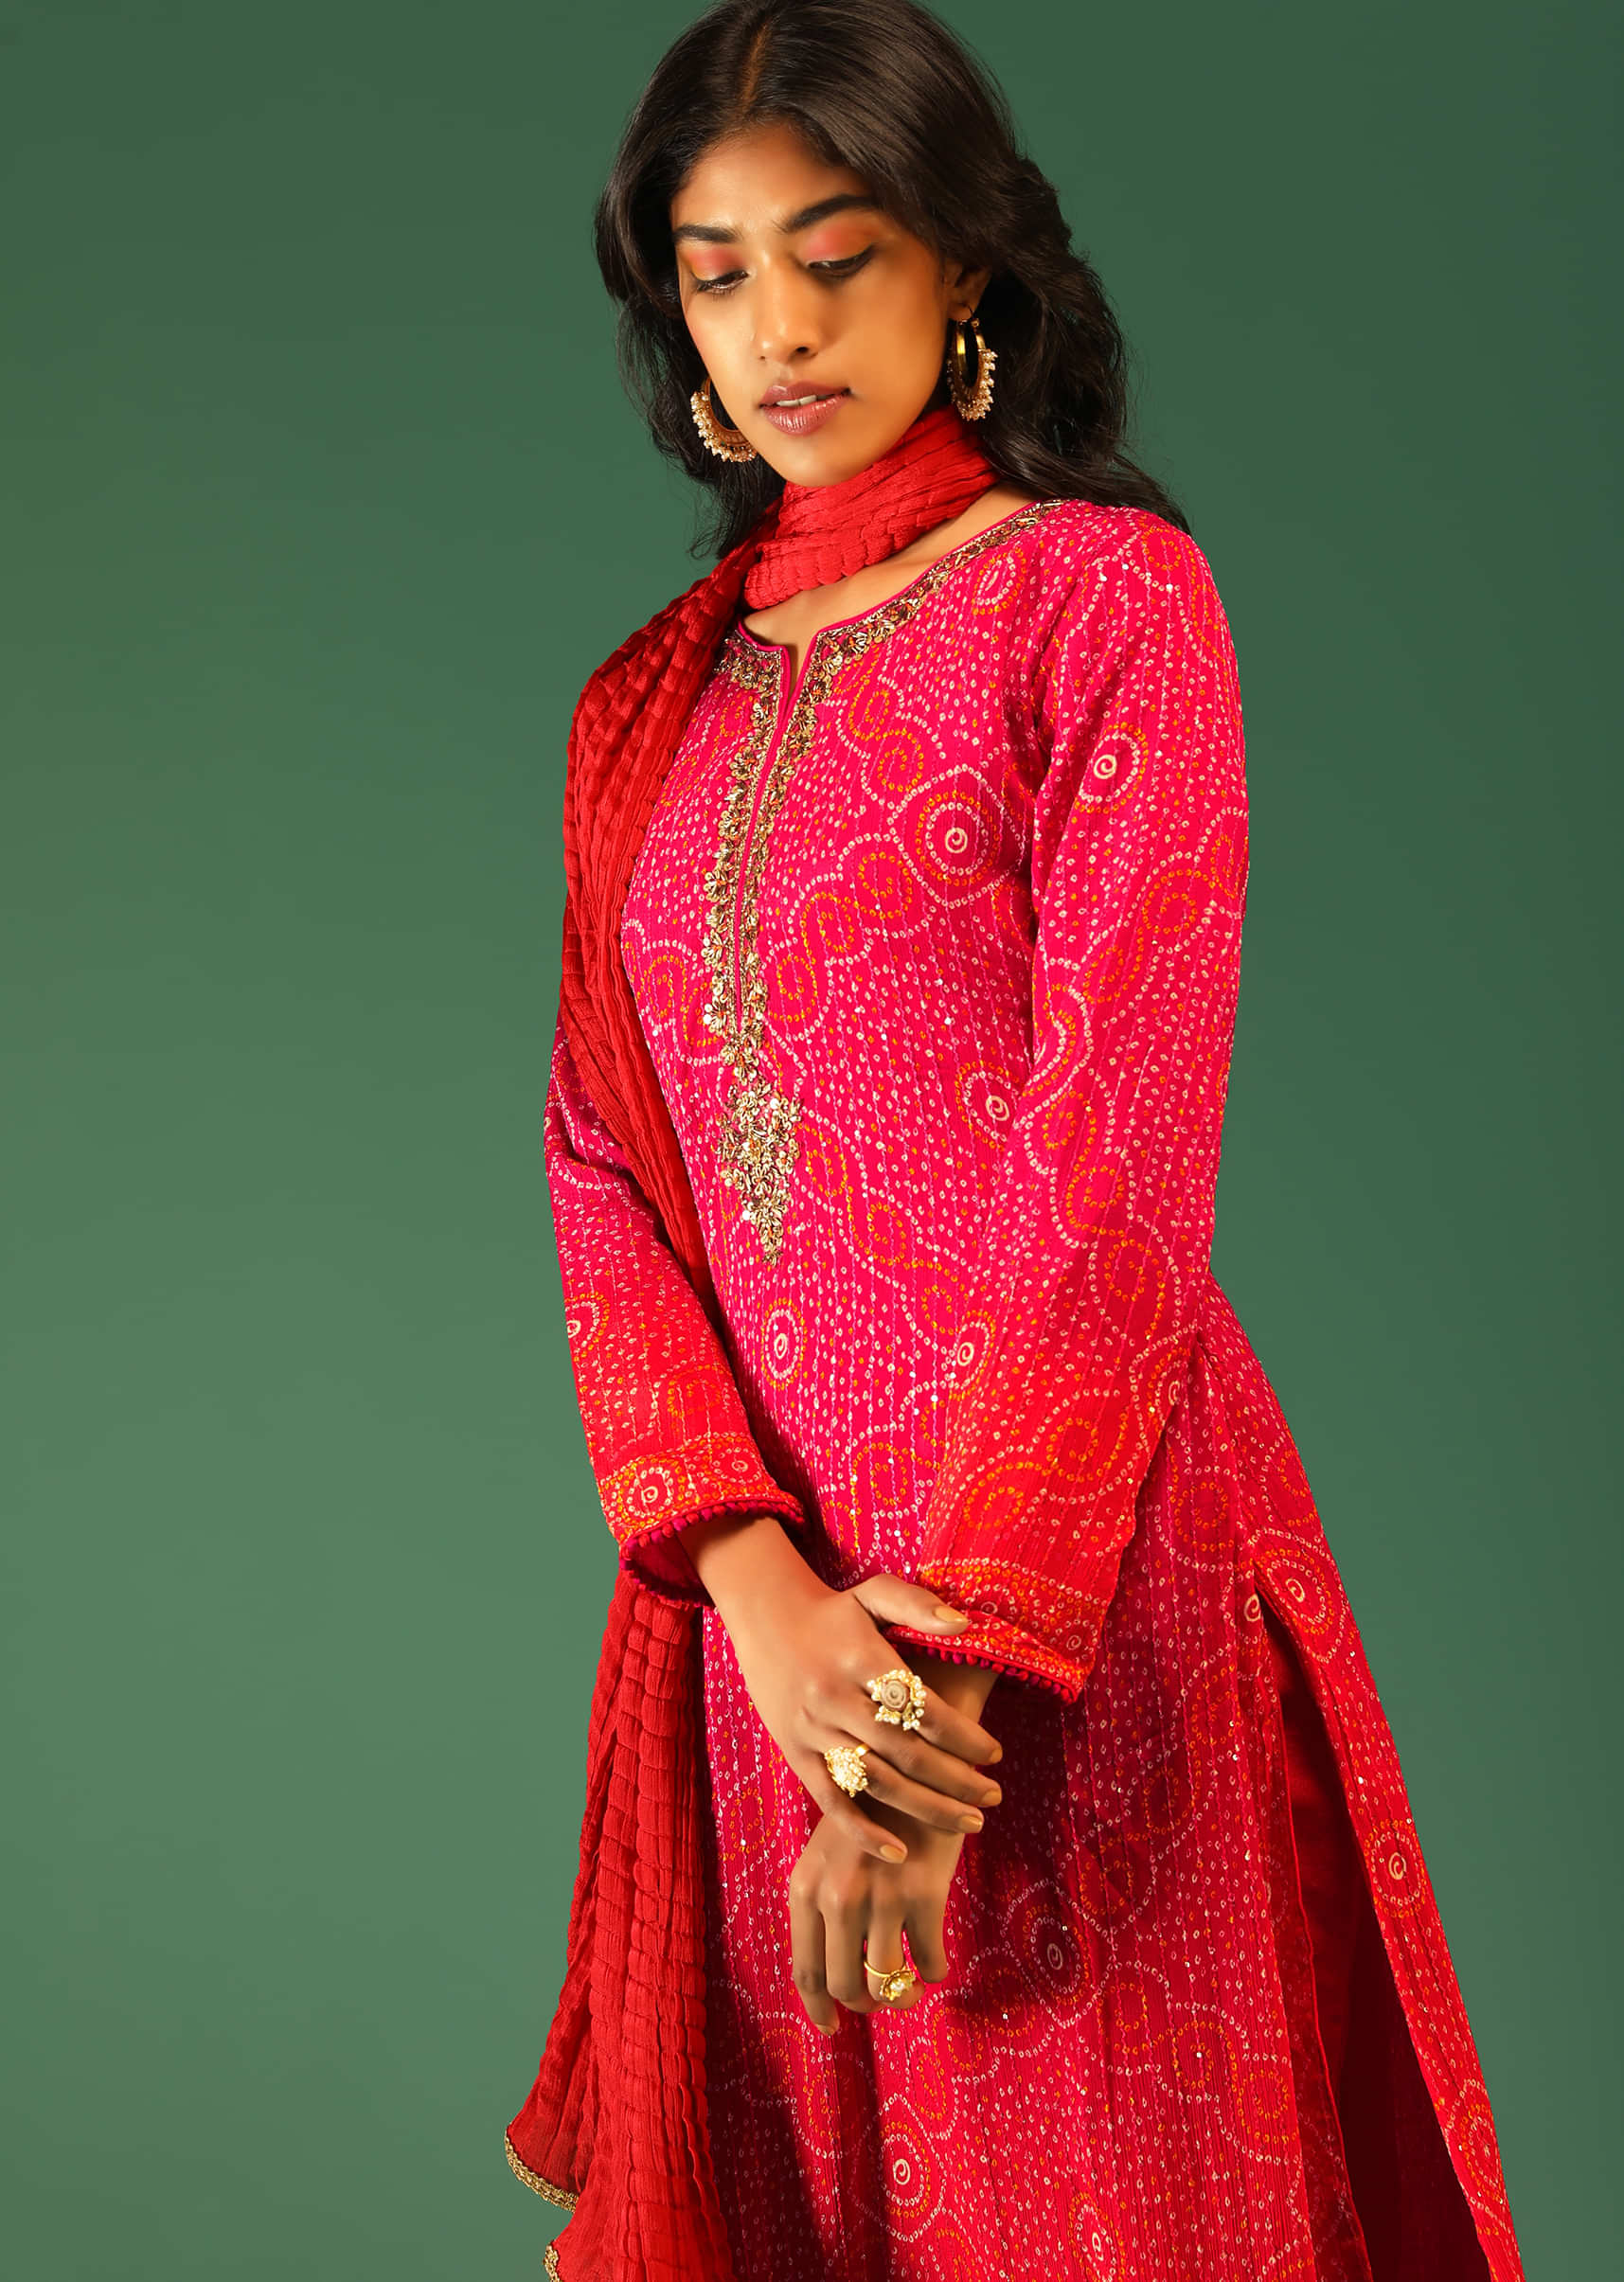 Hot Pink And Orange Shaded Straight Cut Suit In Chiffon With Bandhani Design All Over And Tassels On The Hem  